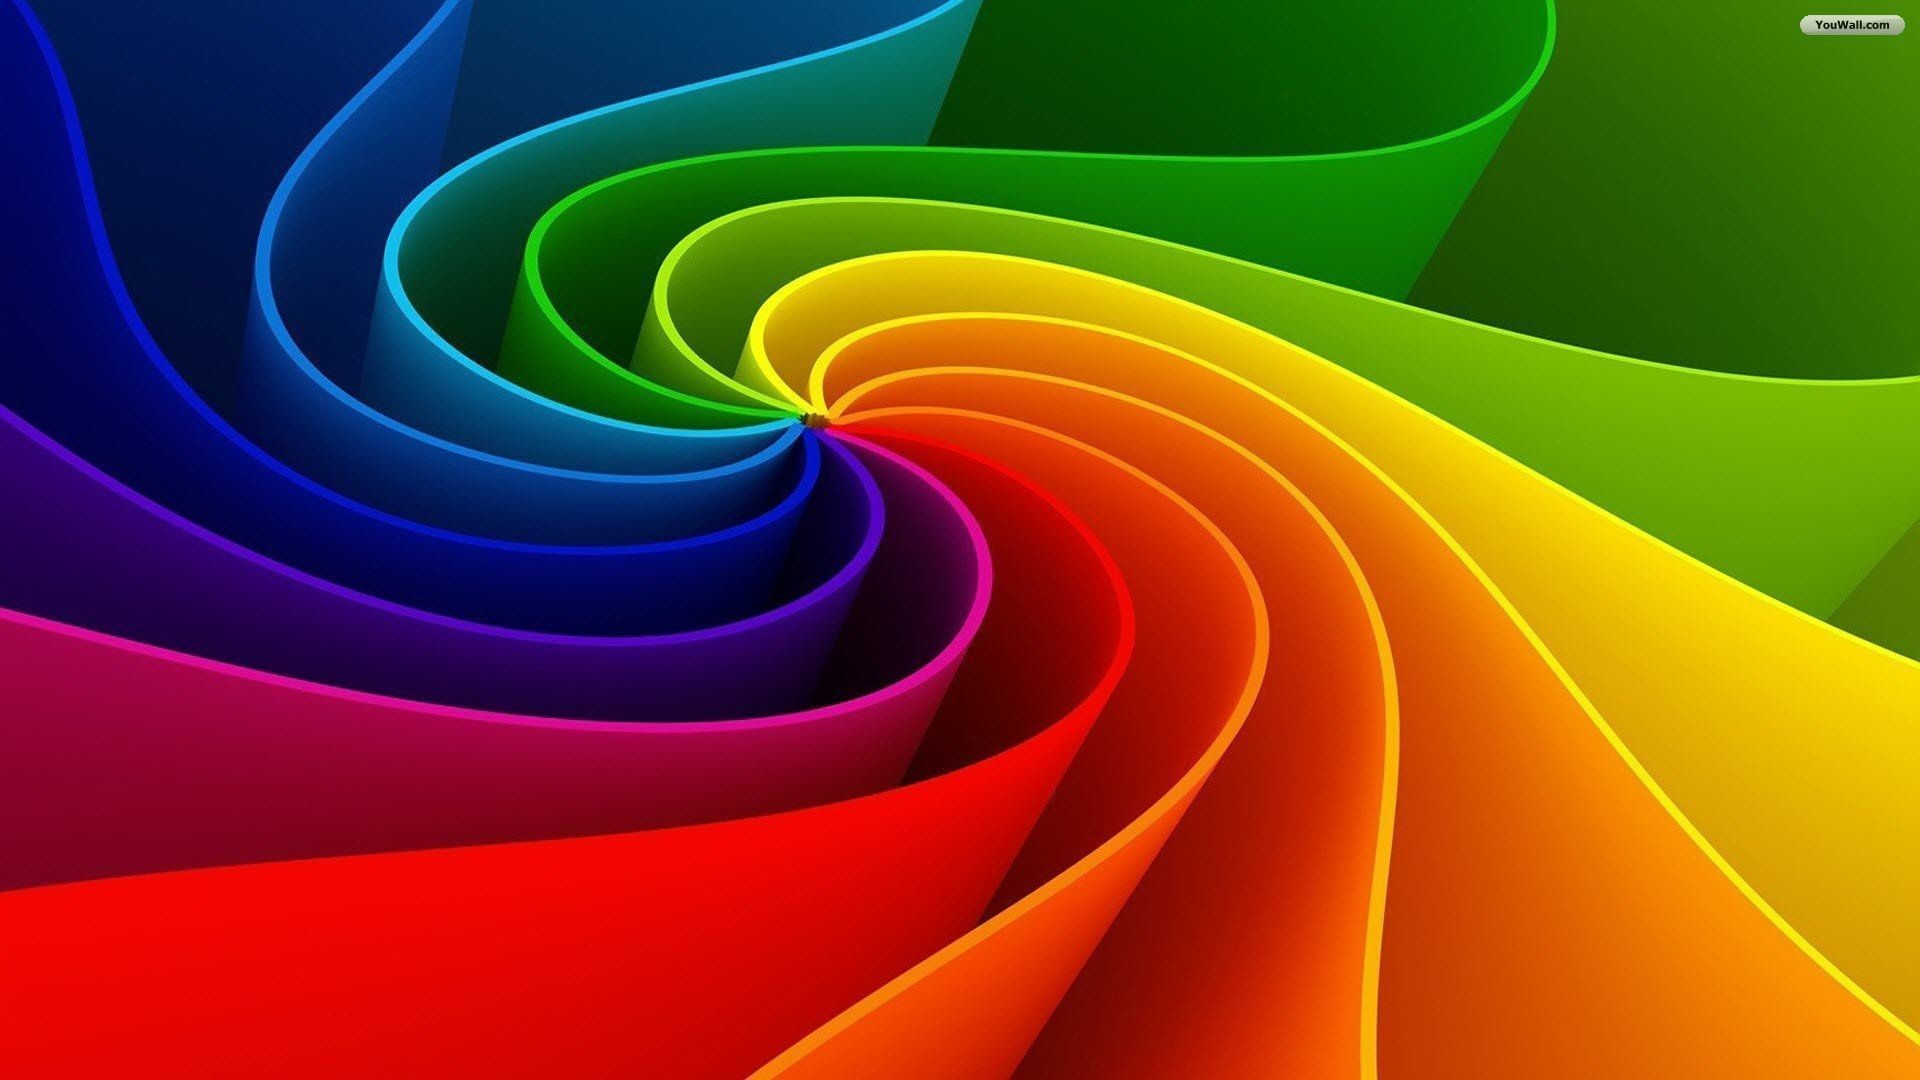 1920x1080 Top Abstract Rainbow Background Wallpaper Images for Pinterest